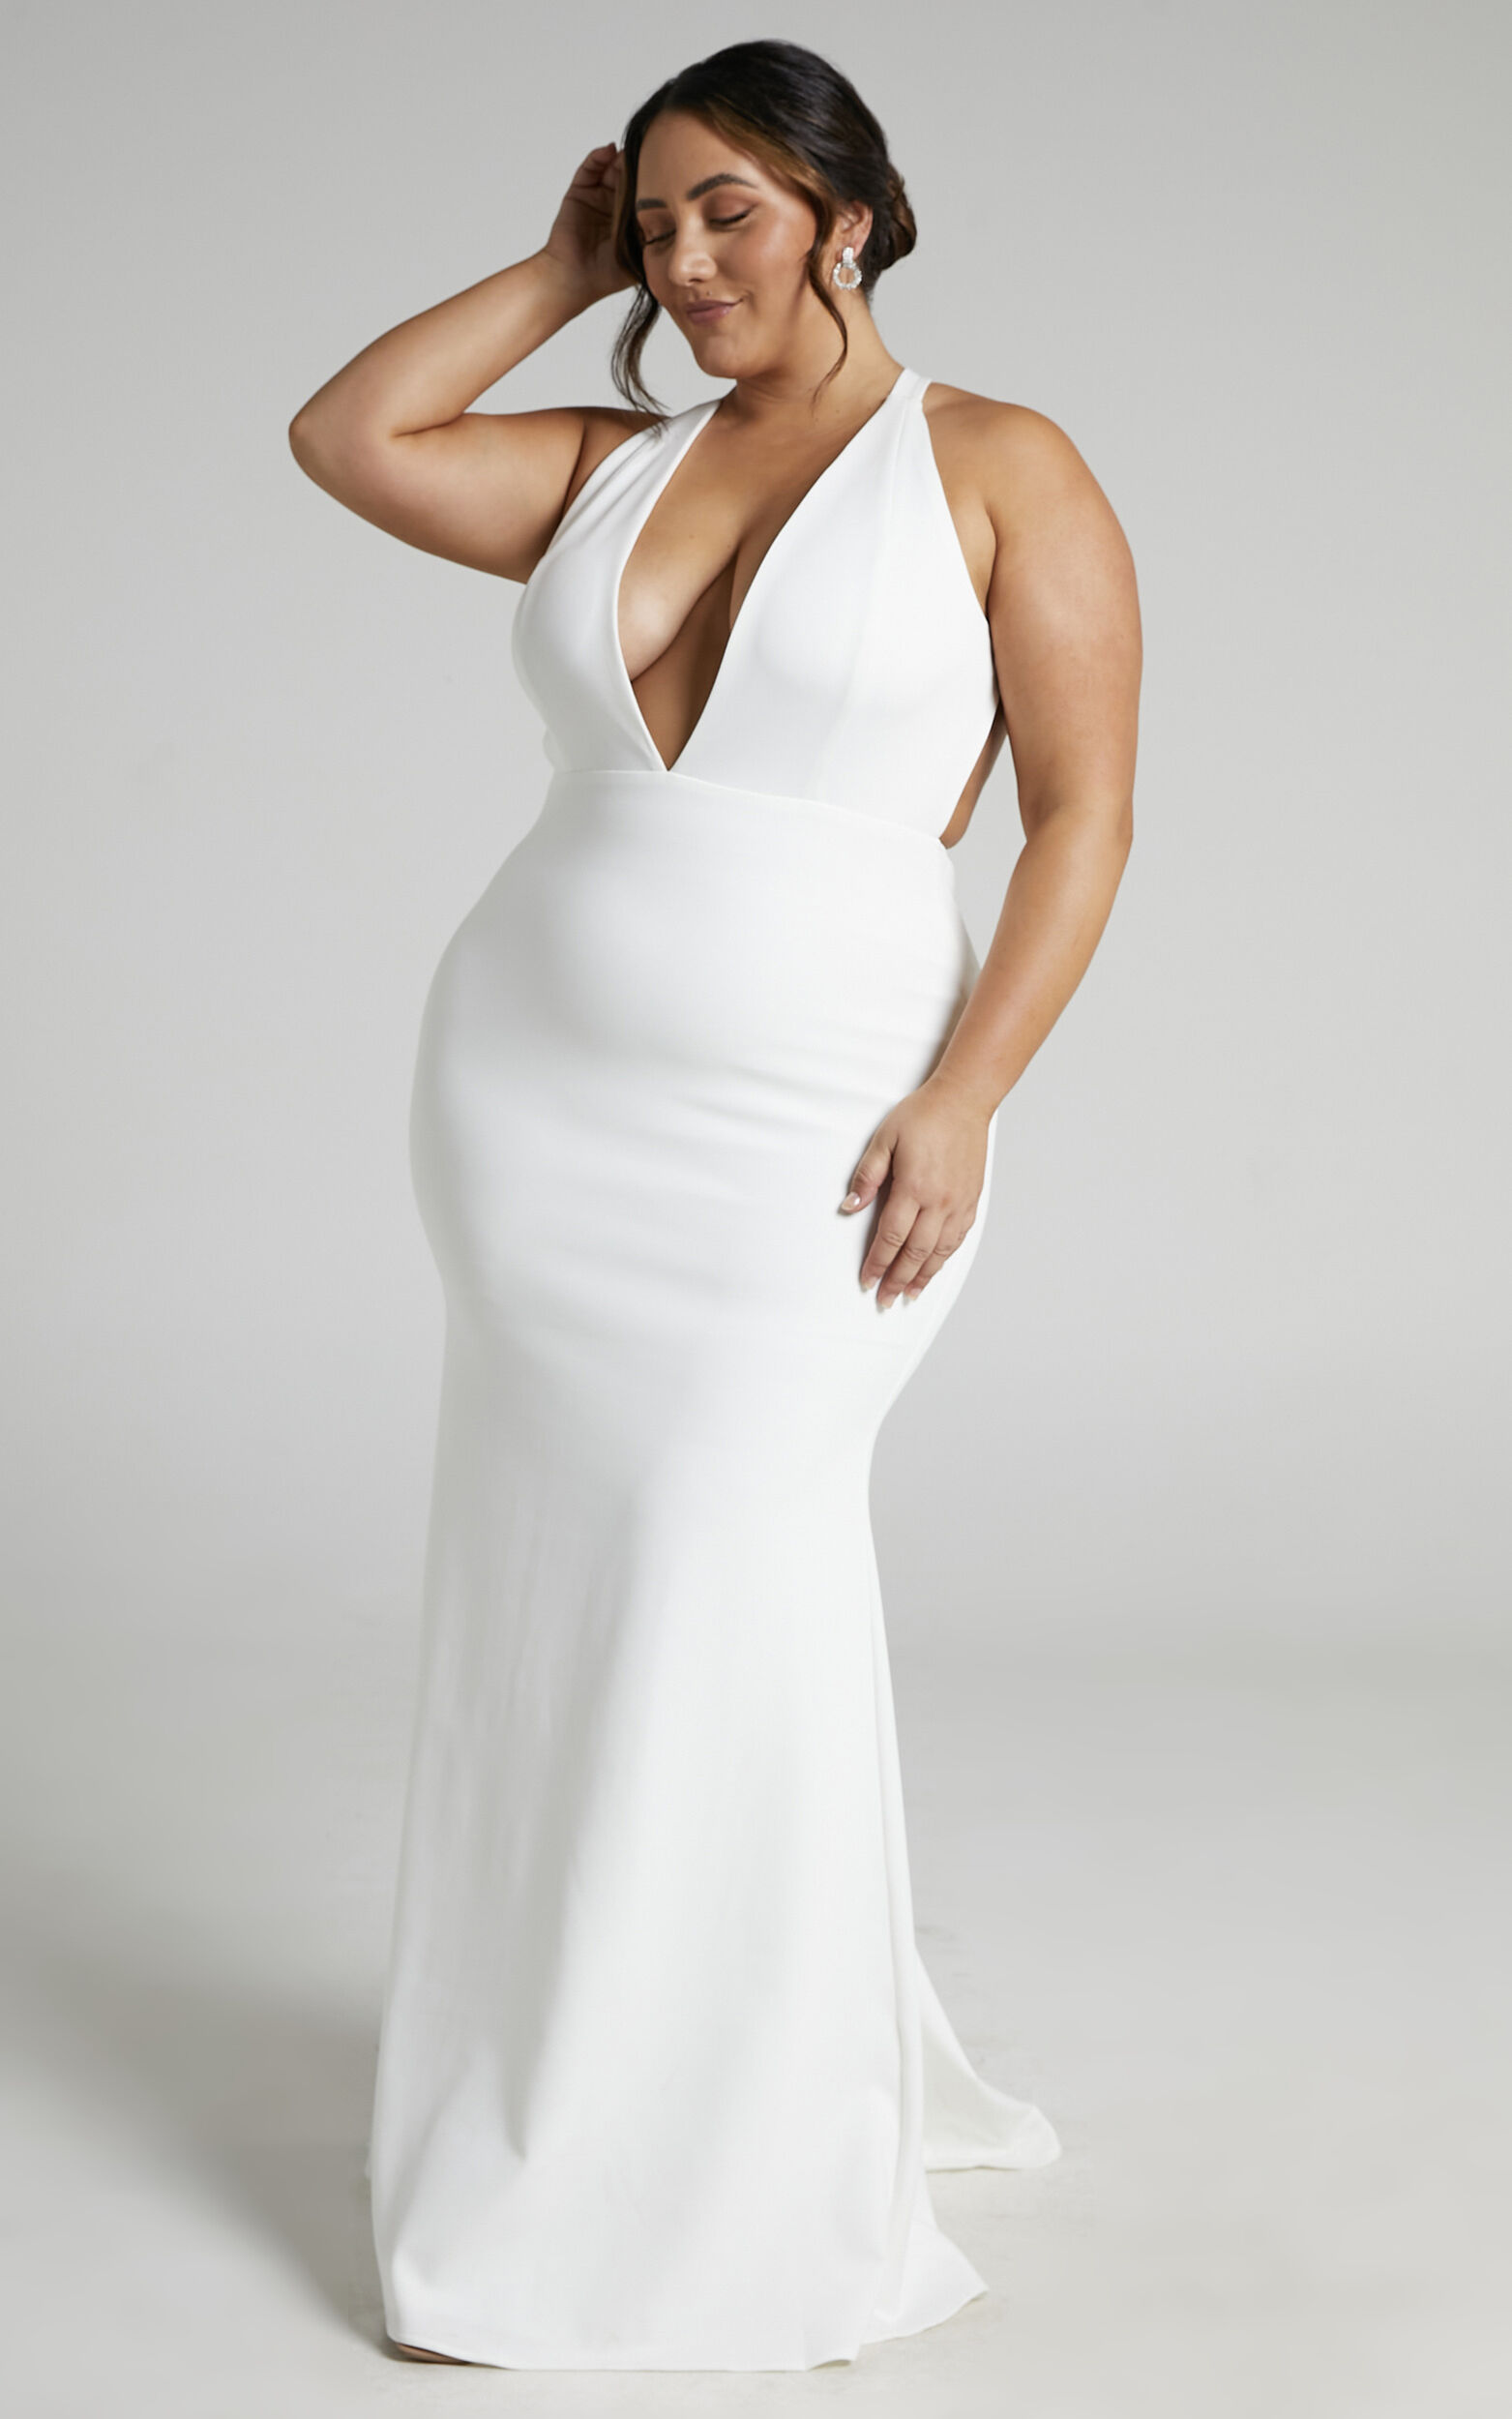 Taveuni Plunge Cross Back Gown in White - 04, WHT1